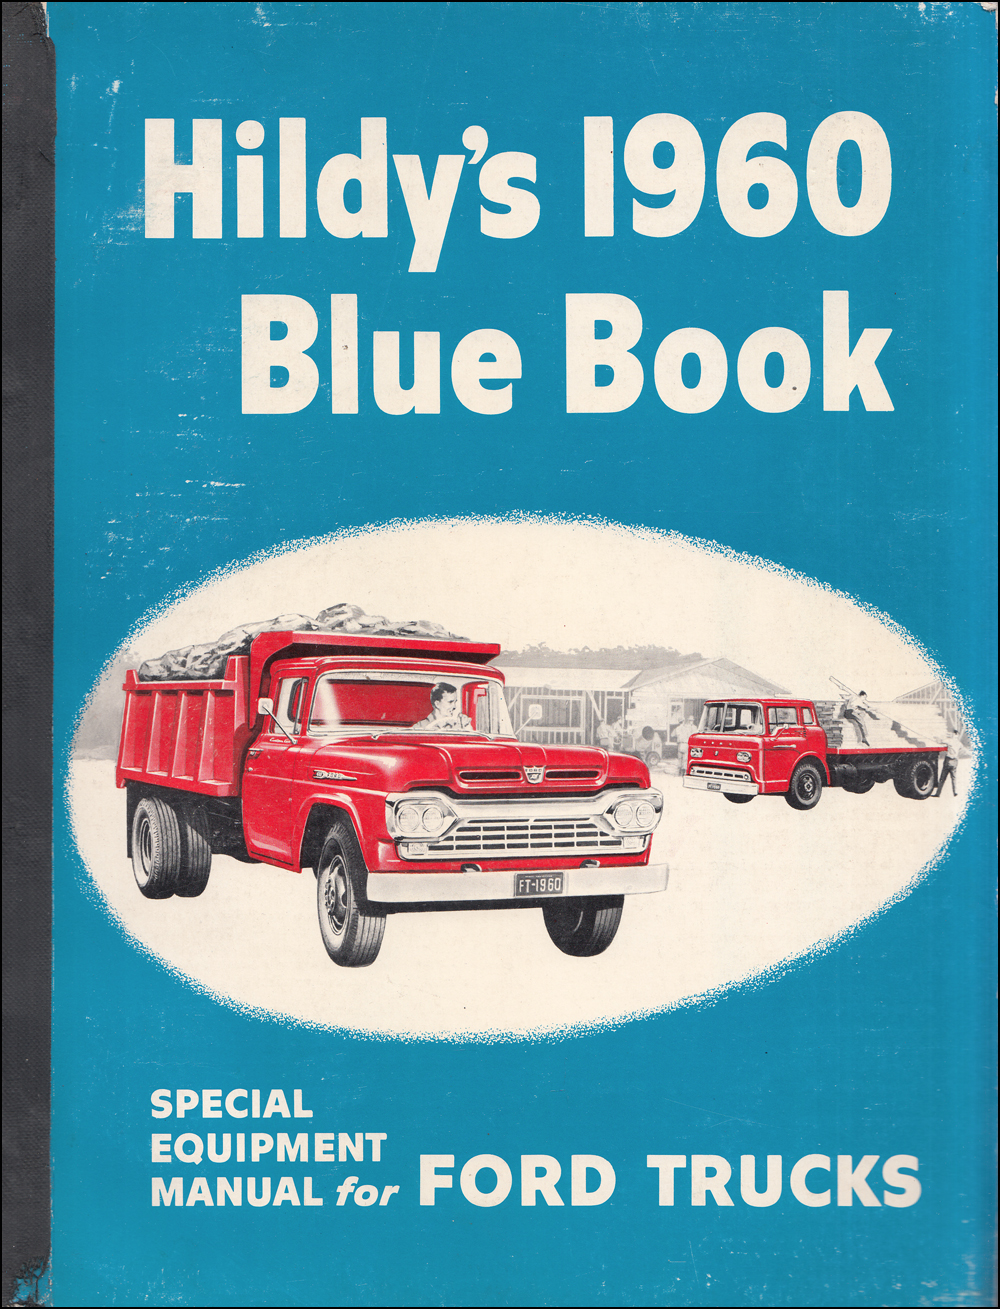 1960 Hildy's Blue Book Ford Truck Special Equipment